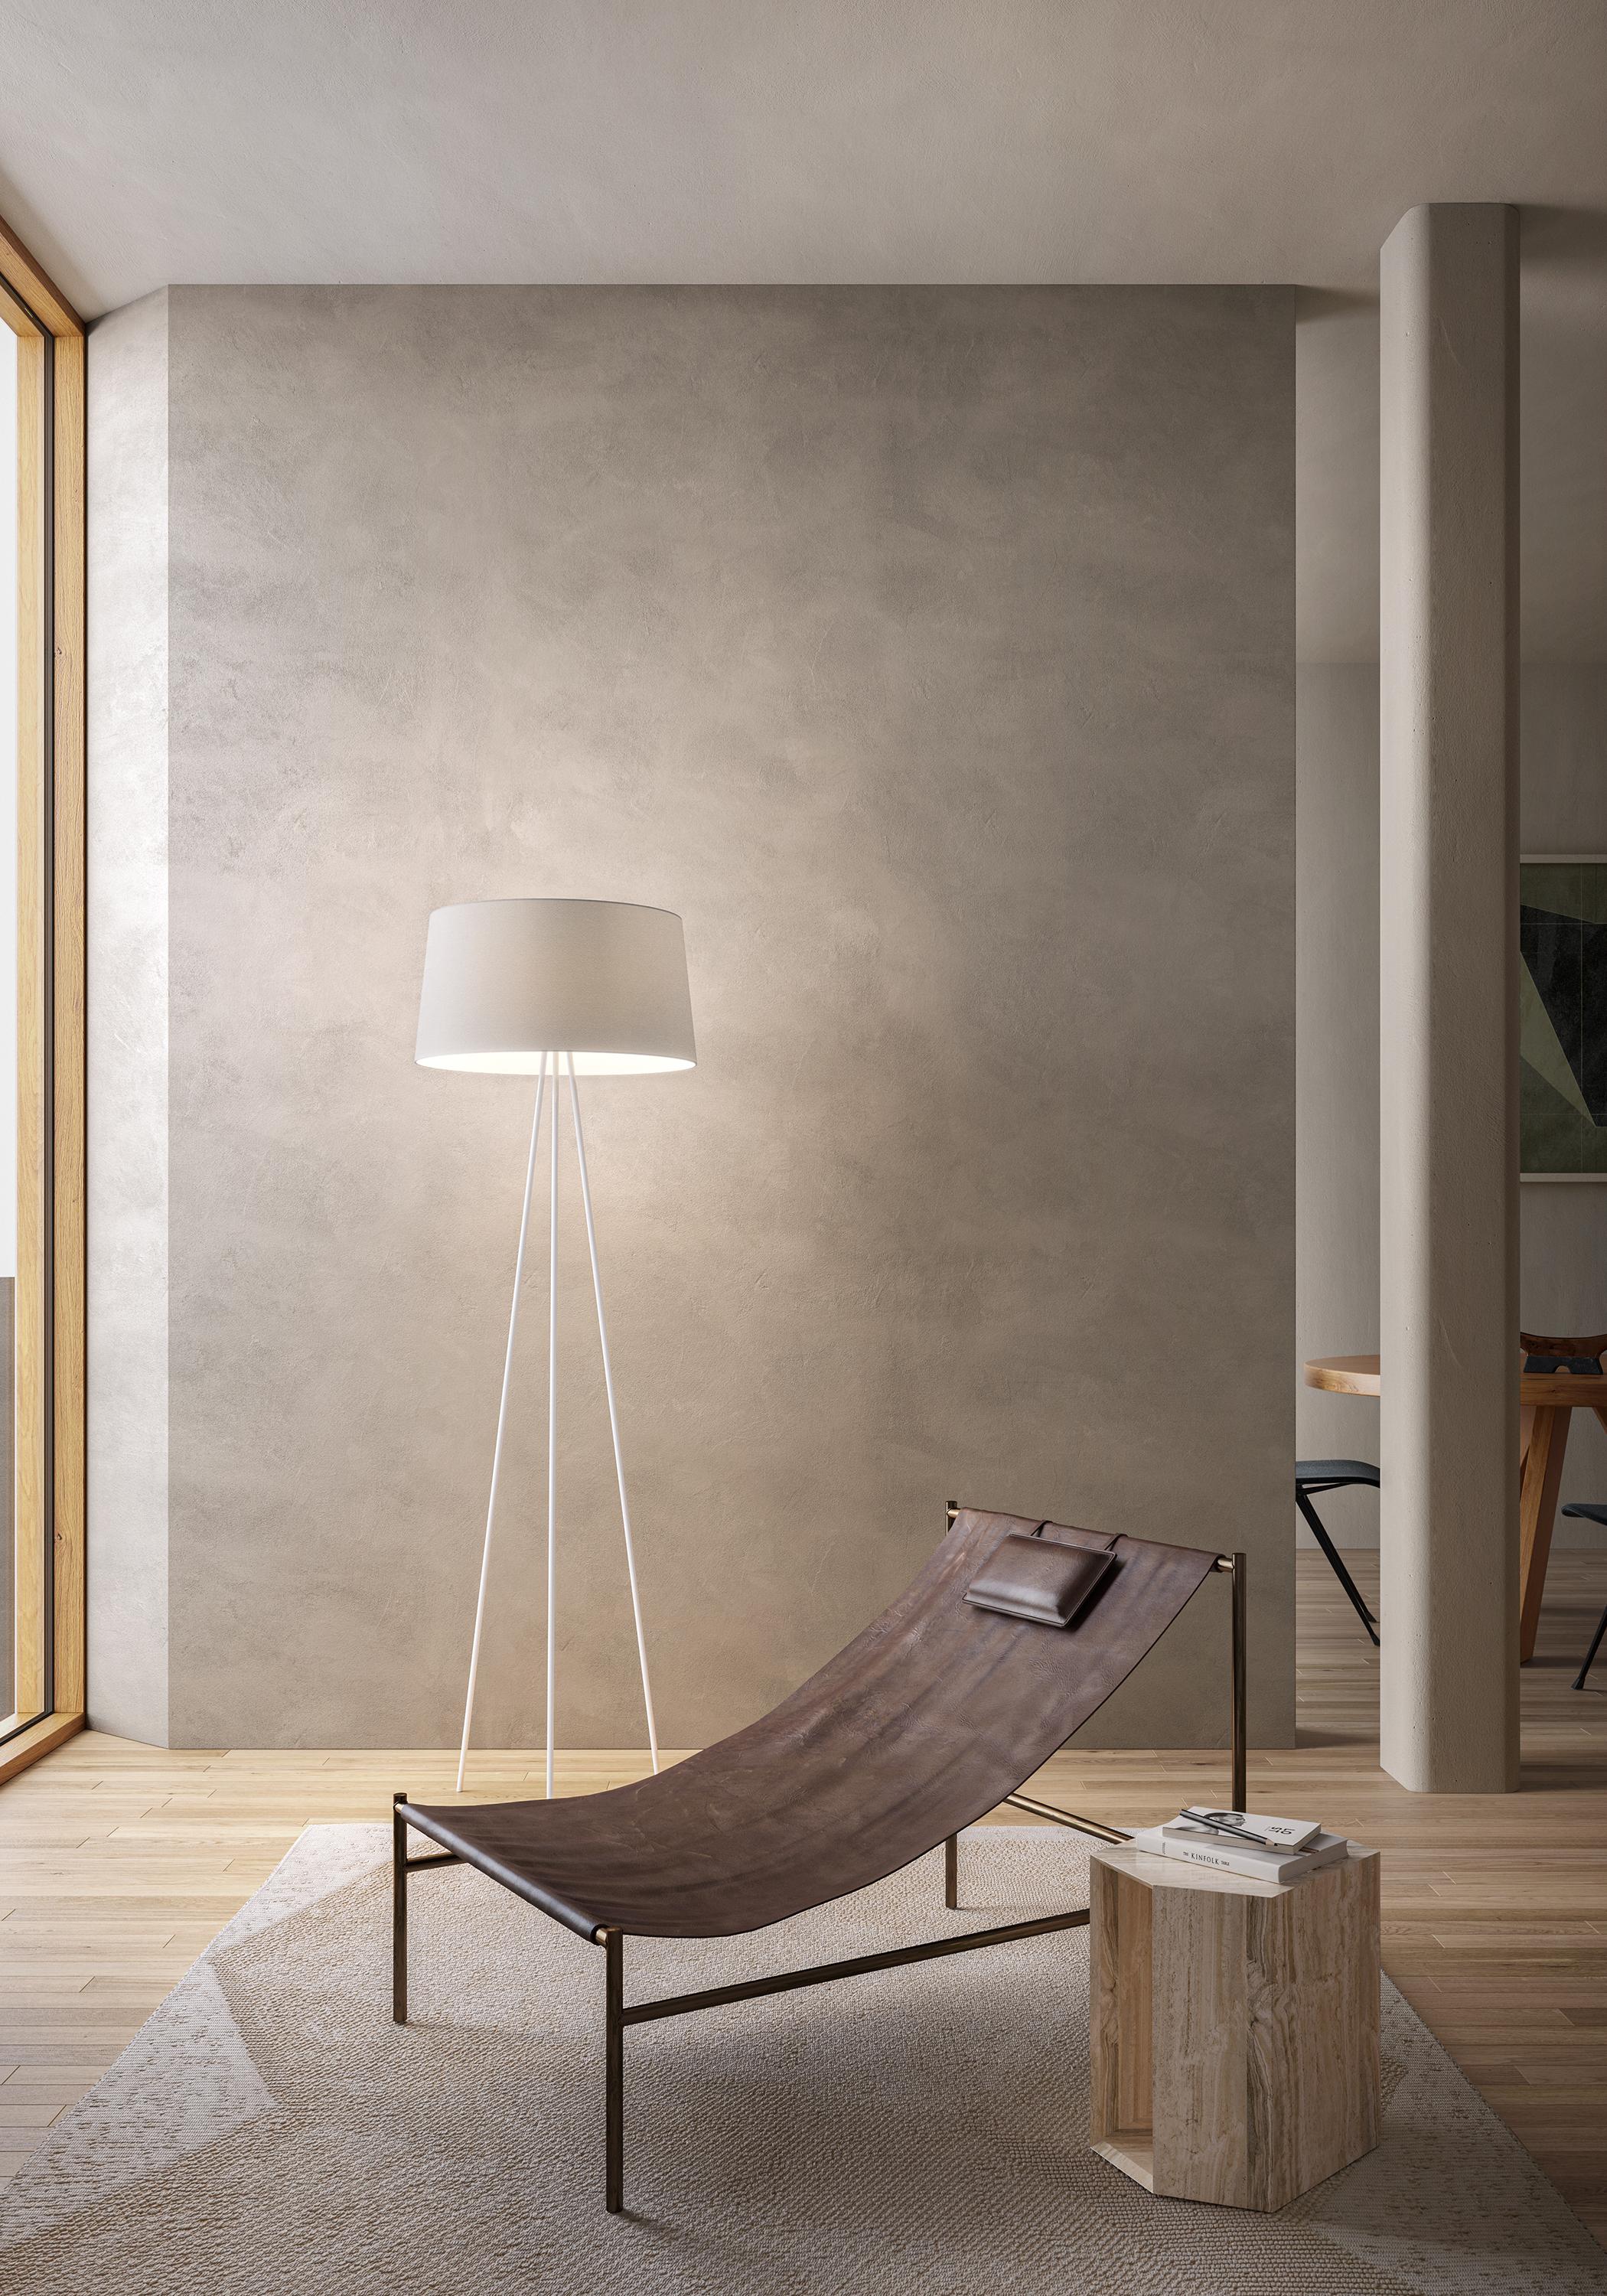 Tripod floor Ecru finish

The modular elements of the most classic of lamps become basic and exclusive. Three simple lines for the support and straightforward volume for the fabric lampshade. An ethereal, refined and timeless object. Floor lamp,